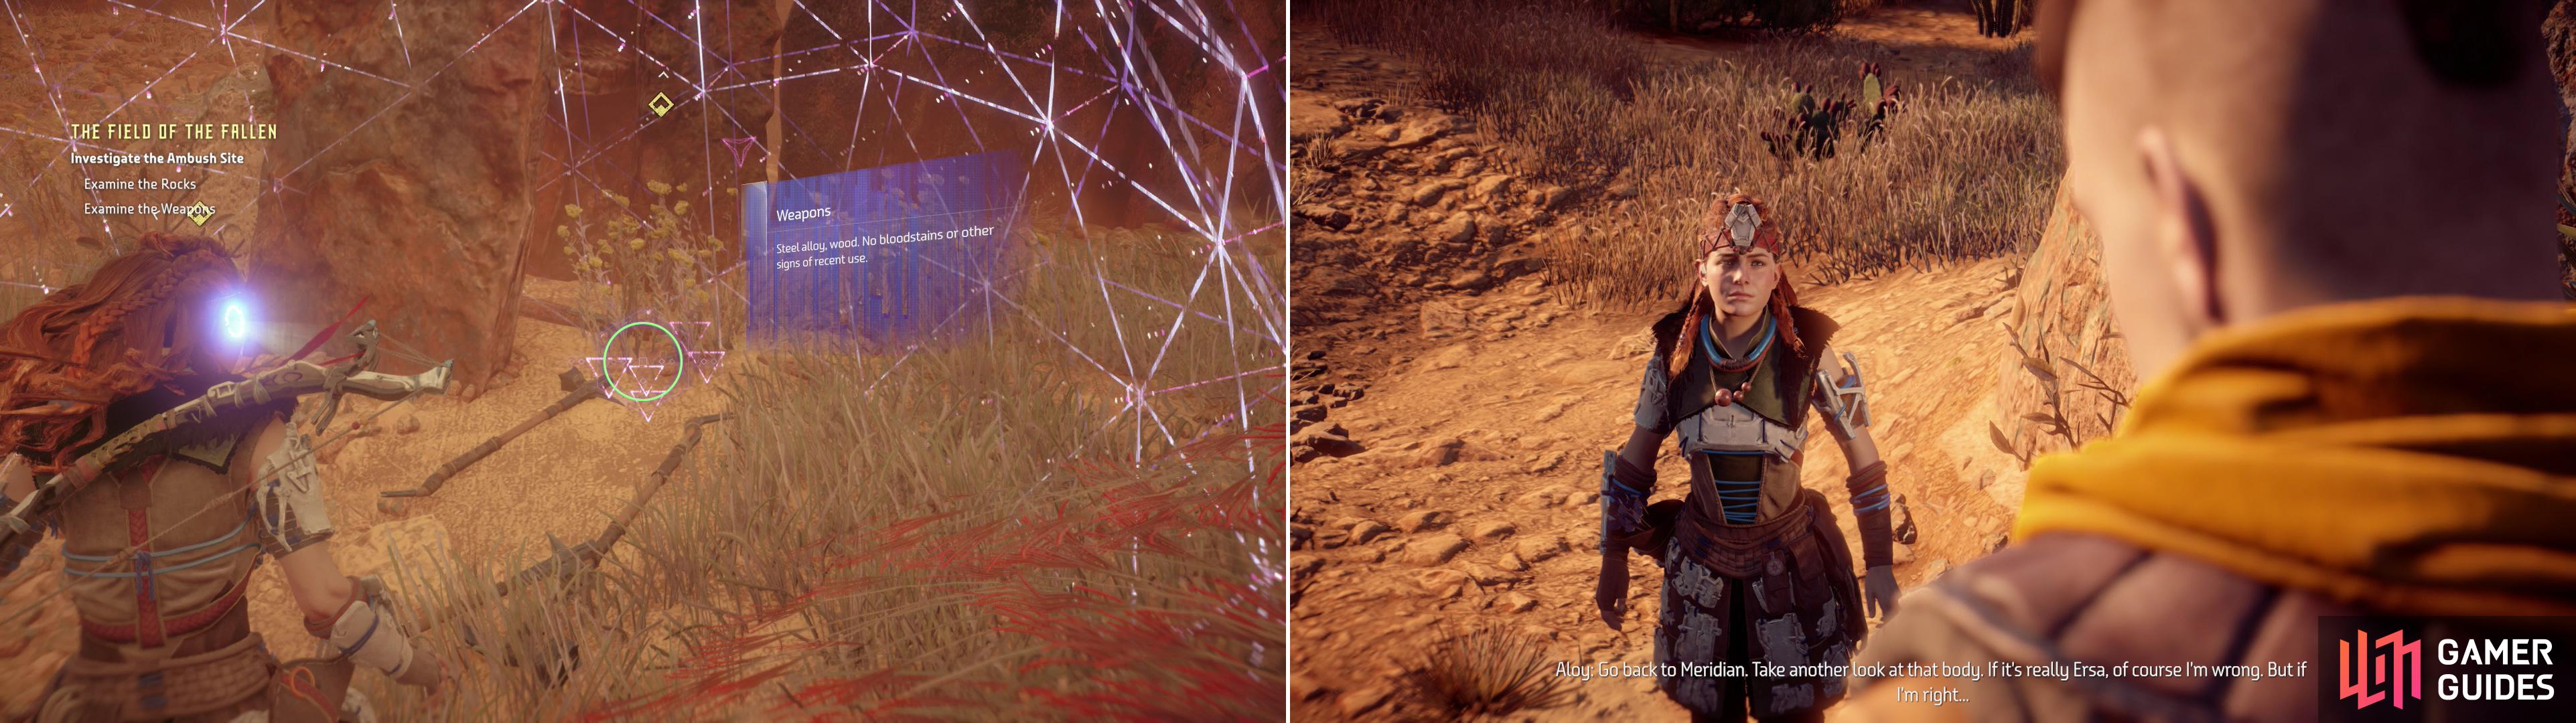 Search the real ambush site for clues about Ersa’s fate (left) which leads Aloy to make a rather startling conclusion (right).